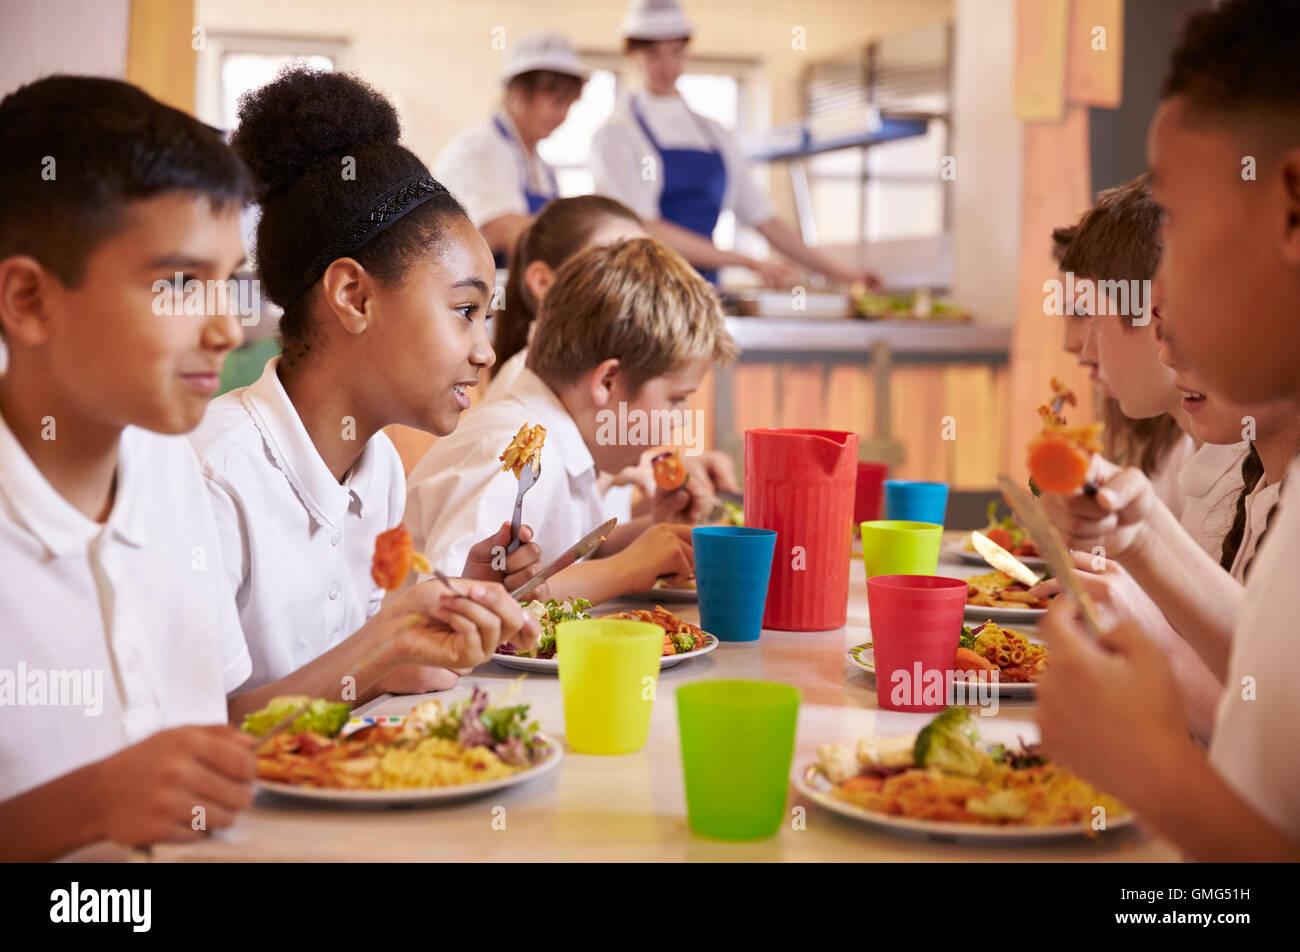 https://c8.alamy.com/comp/GMG51H/primary-school-kids-eat-lunch-in-school-cafeteria-close-up-GMG51H.jpg